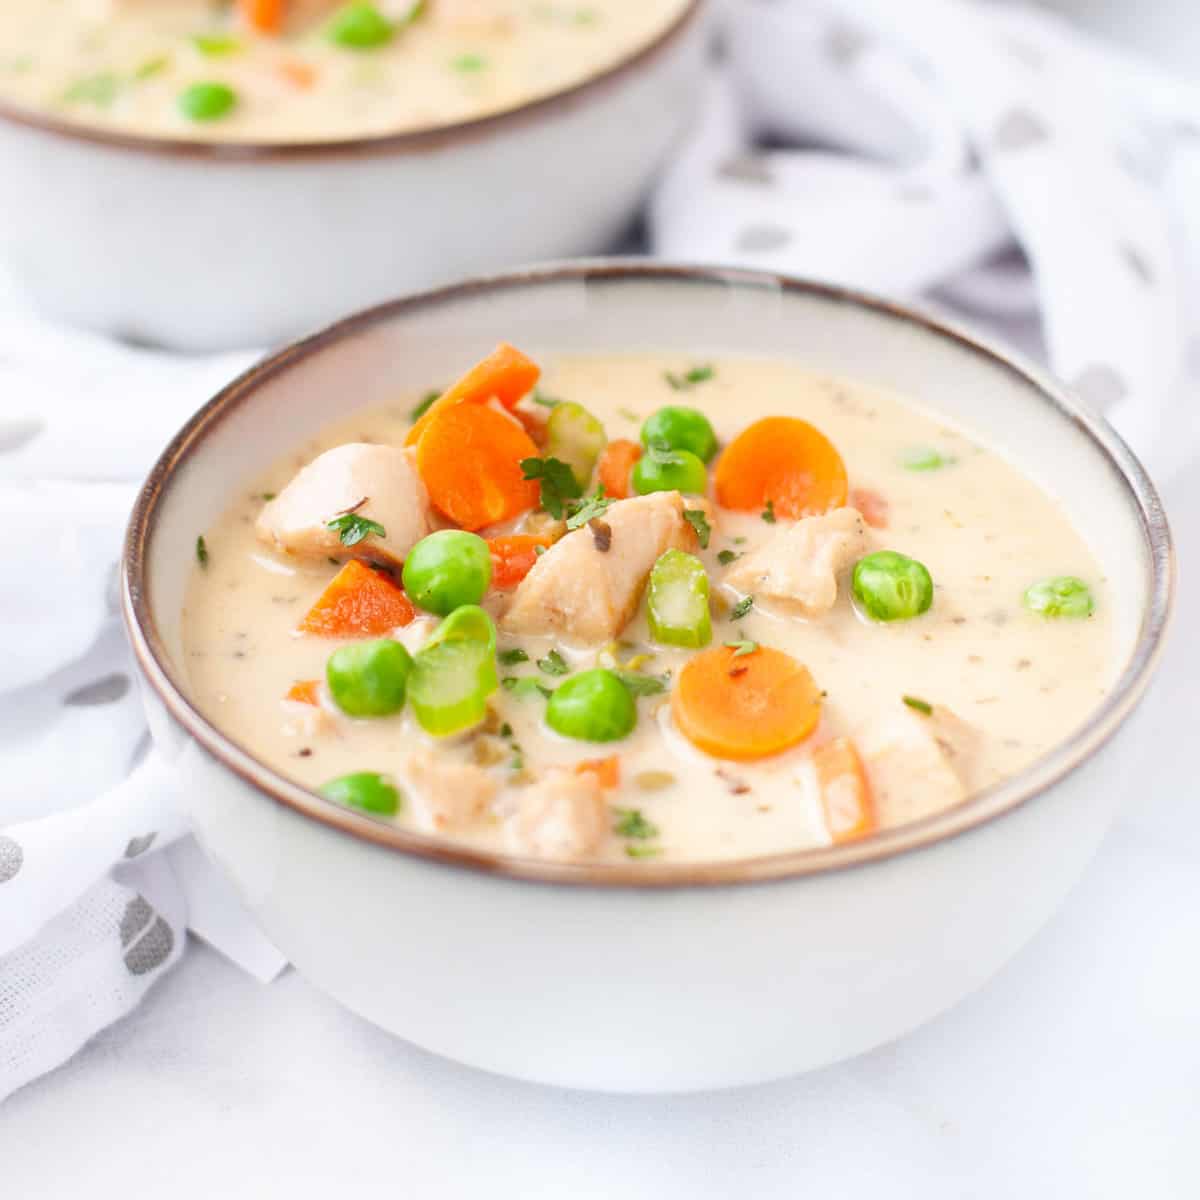 https://peaceloveandlowcarb.com/wp-content/uploads/2020/10/Keto-Chicken-Pot-Pie-Soup-Peace-Love-and-Low-Carb-scaled.jpg